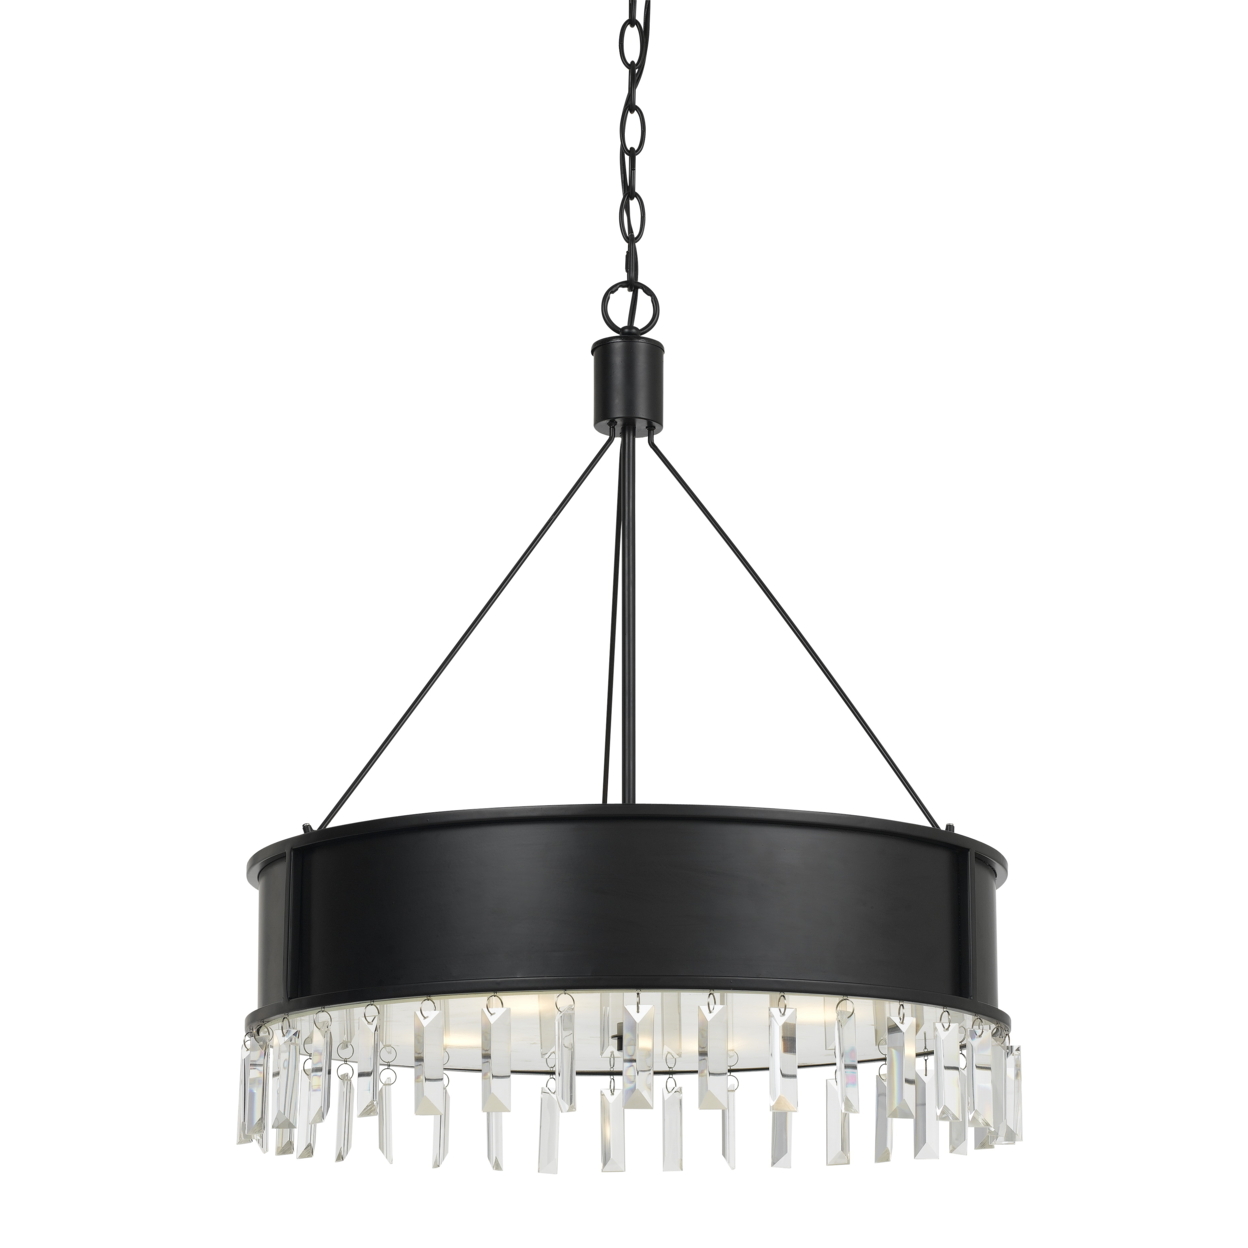 4 Bulb Round Metal Body Chandelier With Hanging Crystal Accents, Black- Saltoro Sherpi